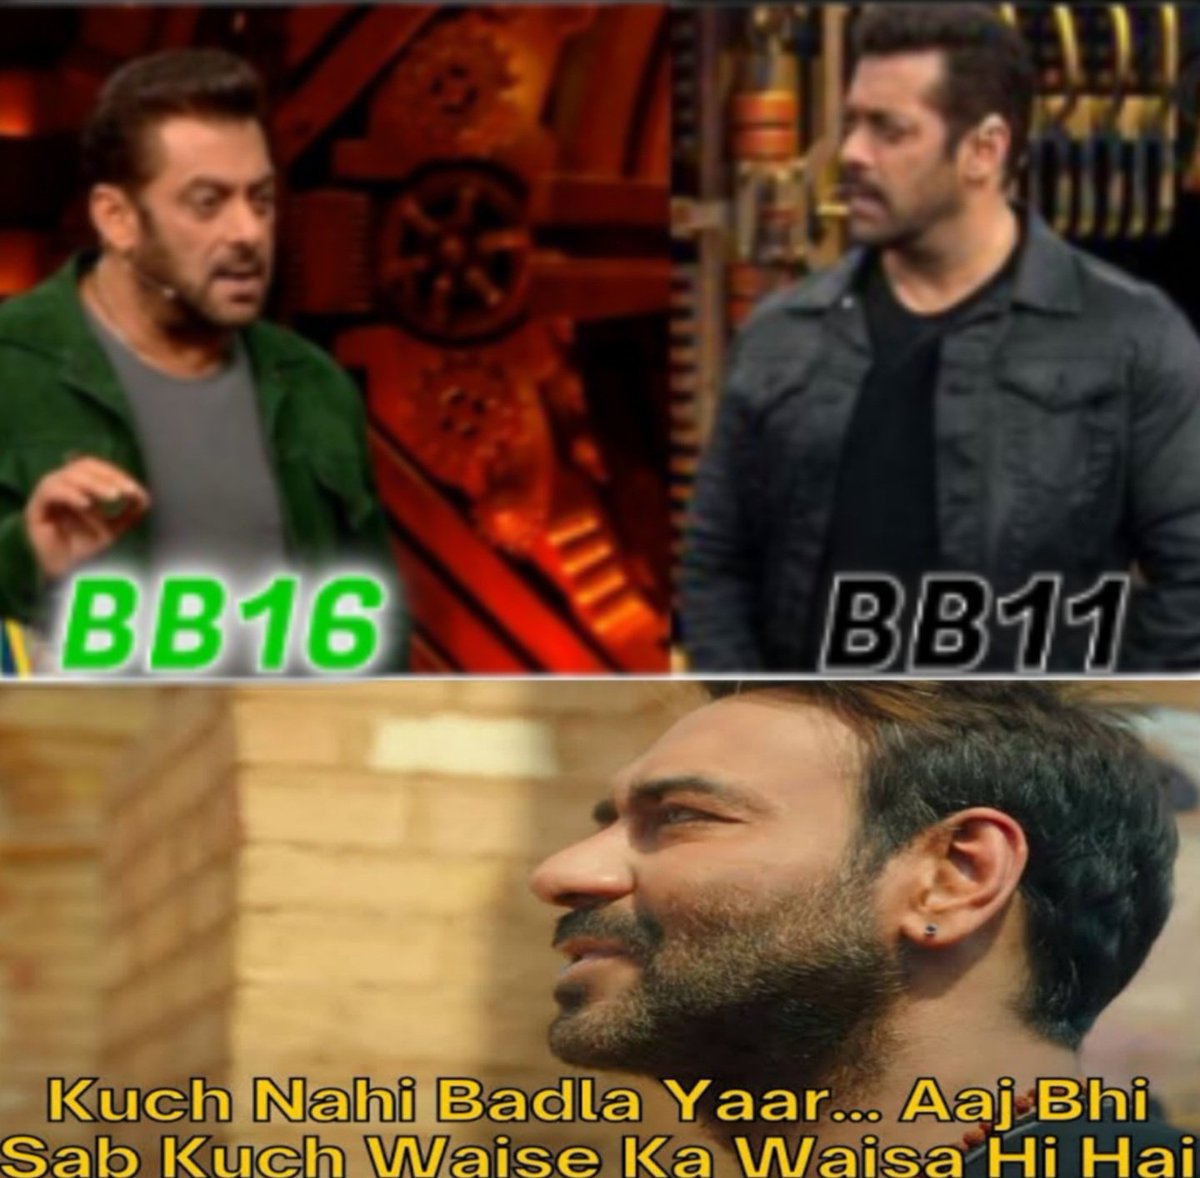 #SalmanKhan refuse to age and he is maintaining such a good physic at the age of 57.

#BiggBoss16            #BiggBoss11